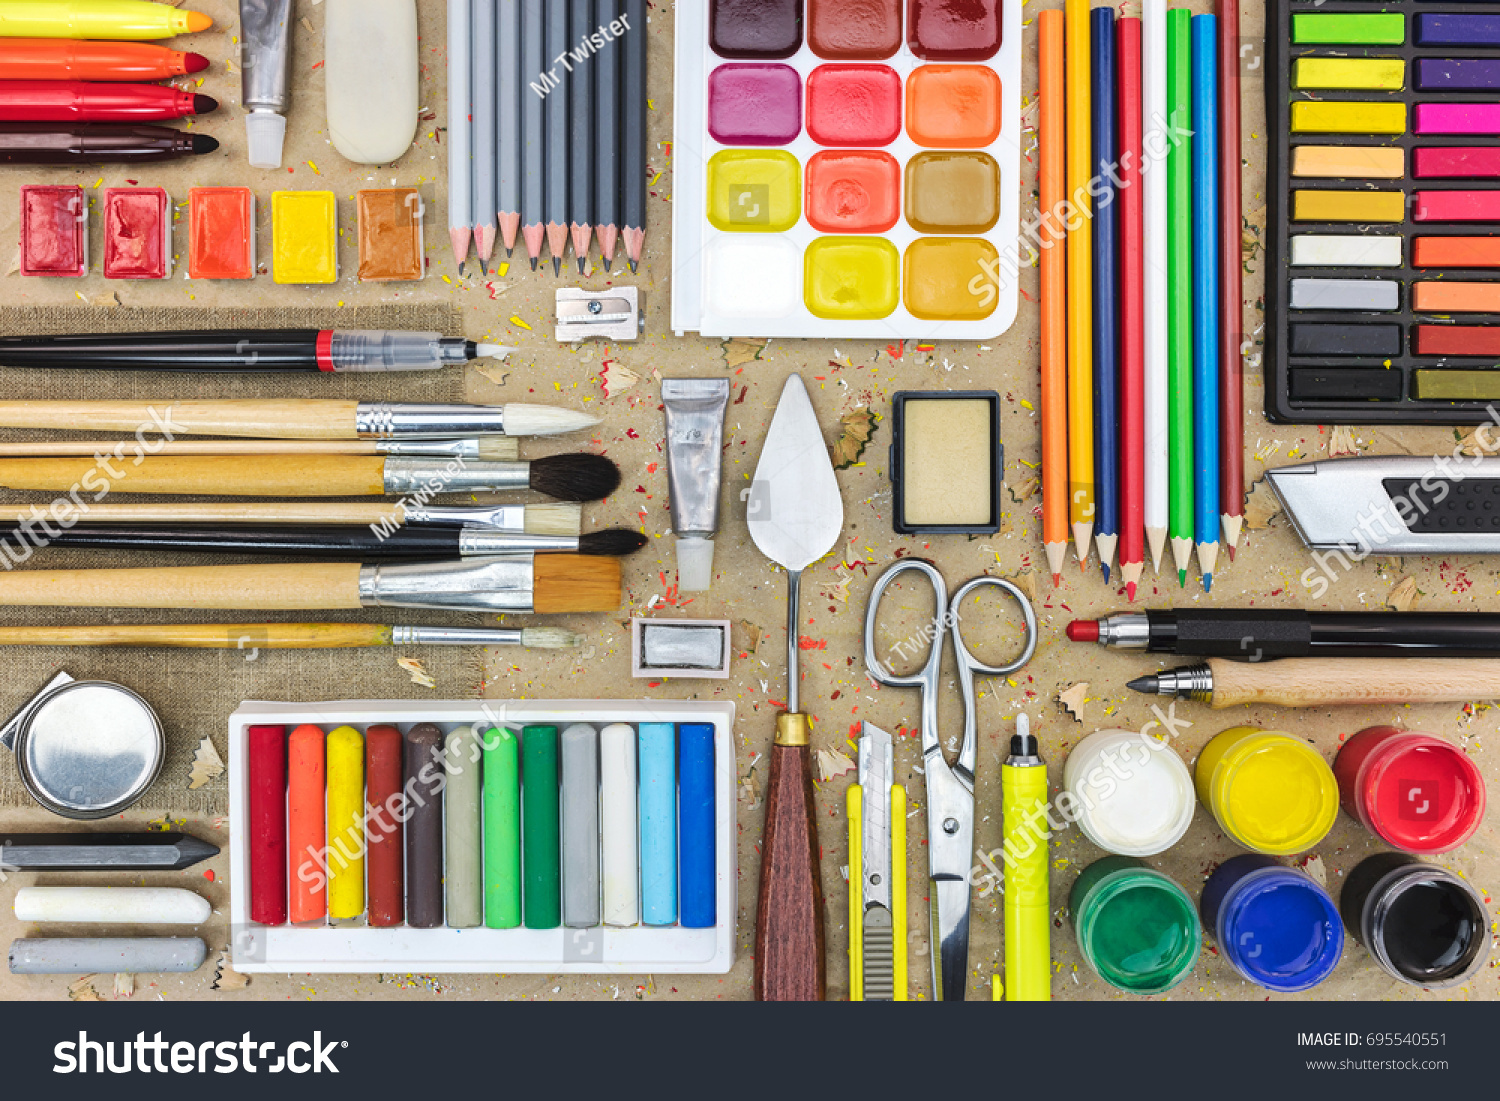 stock-photo-watercolor-paints-paintbrushes-for-painting-colored-pencils-pastel-crayons-and-other-on-desk-695540551.jpg